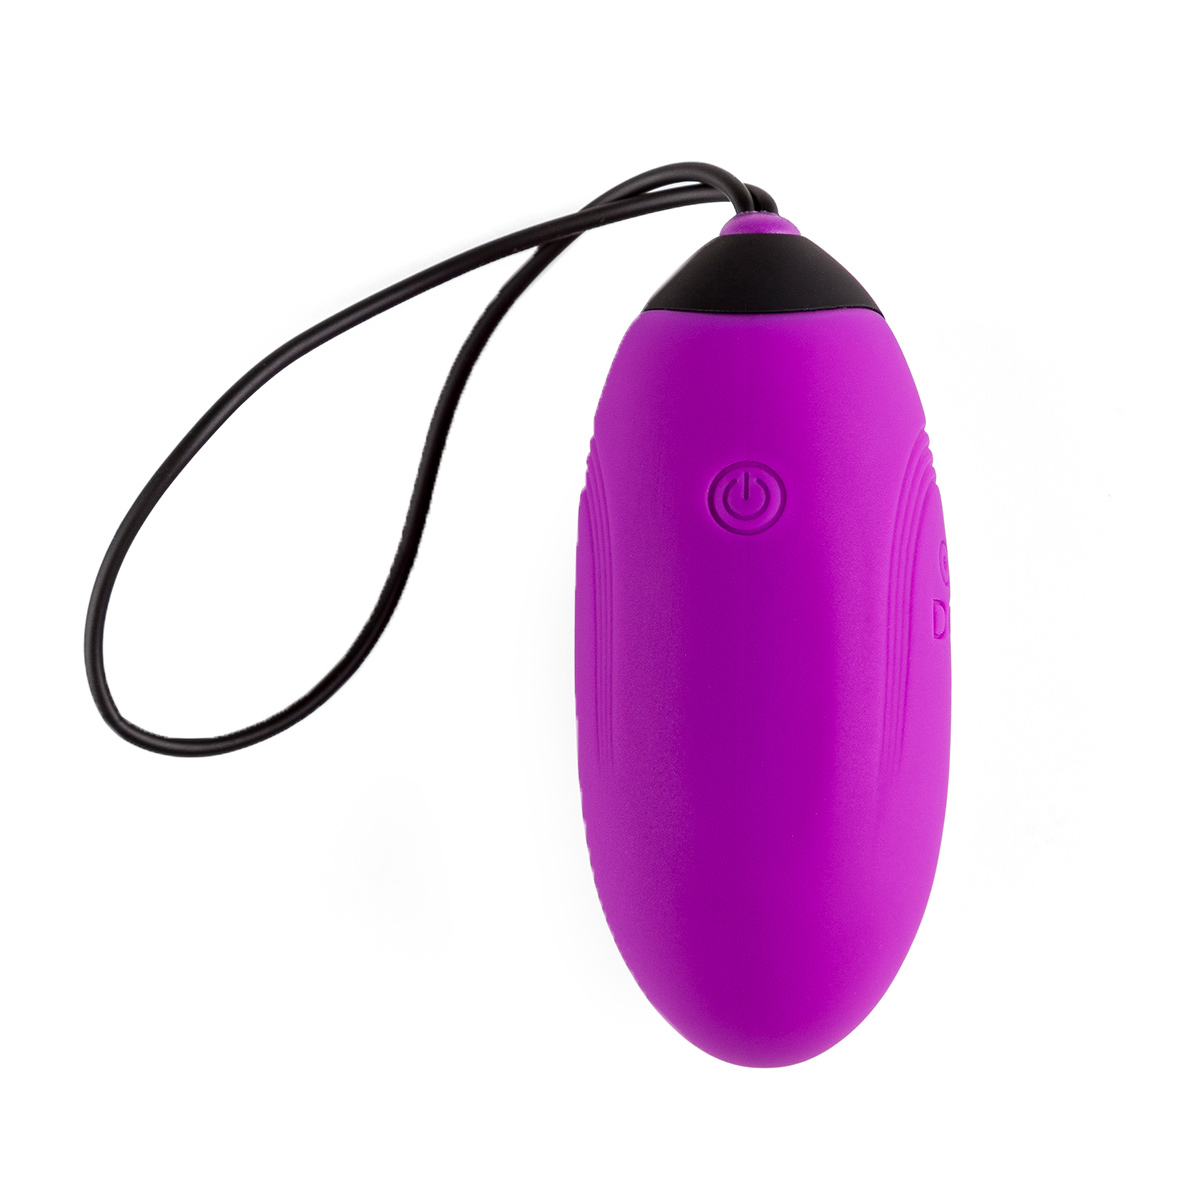 Rechargeable-Remote-Control-Egg-G5-Purple-OPR-3090077-1